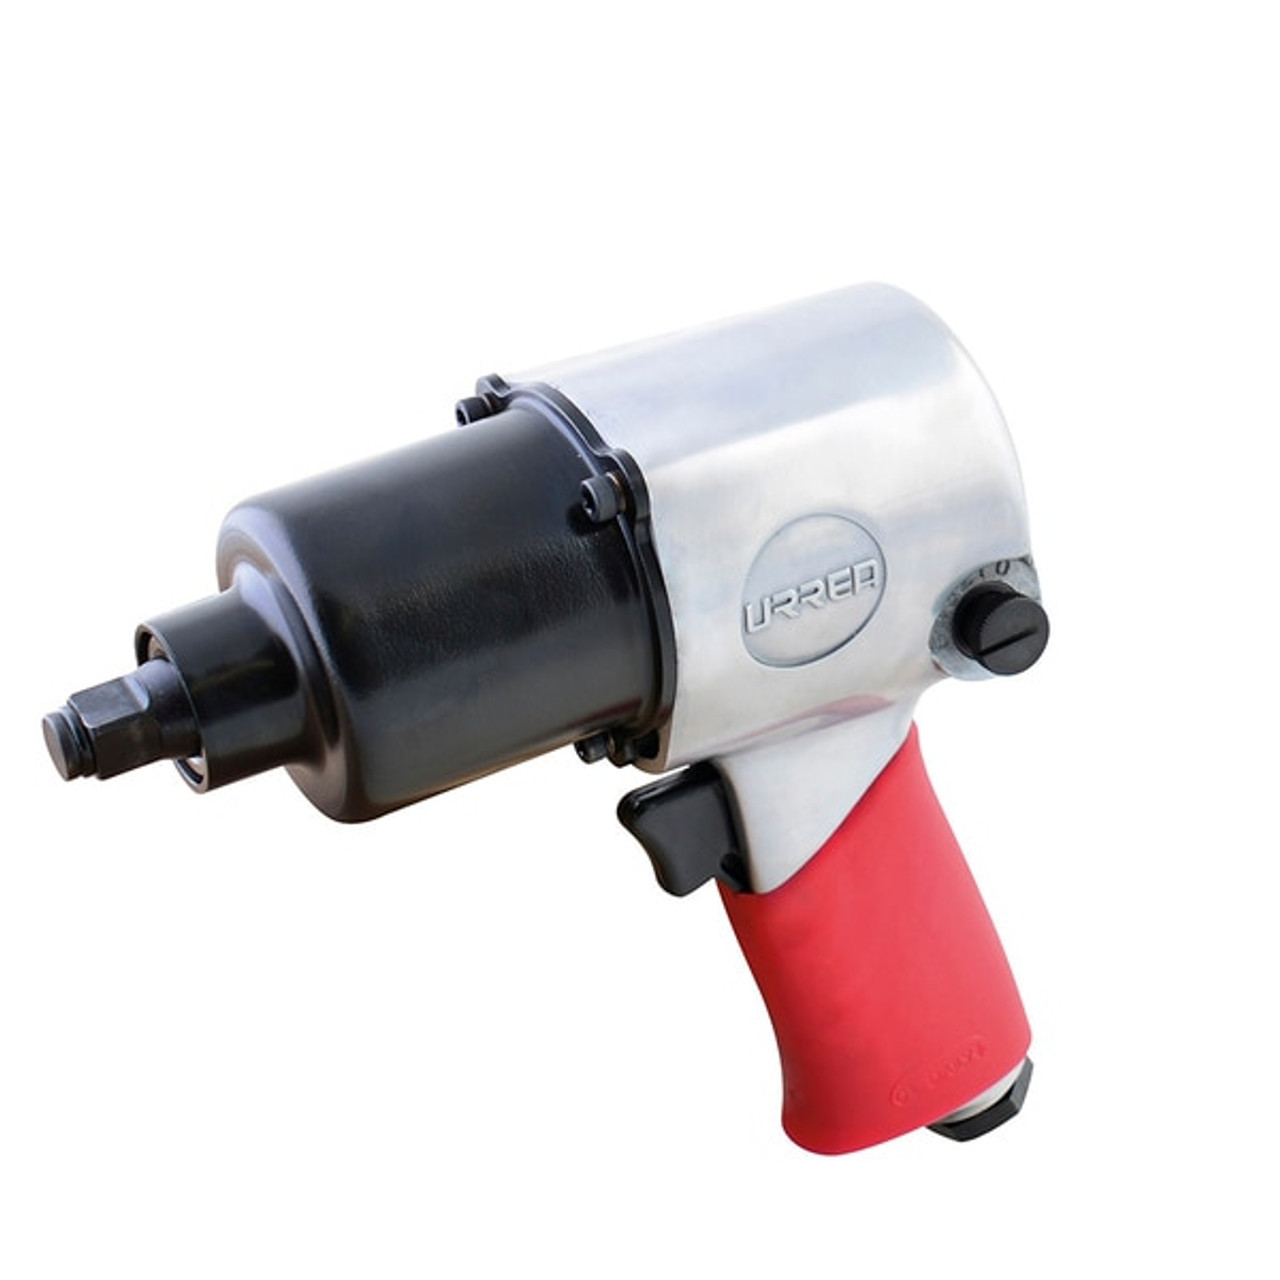 Twin hammer 1/2" drive air impact wrench